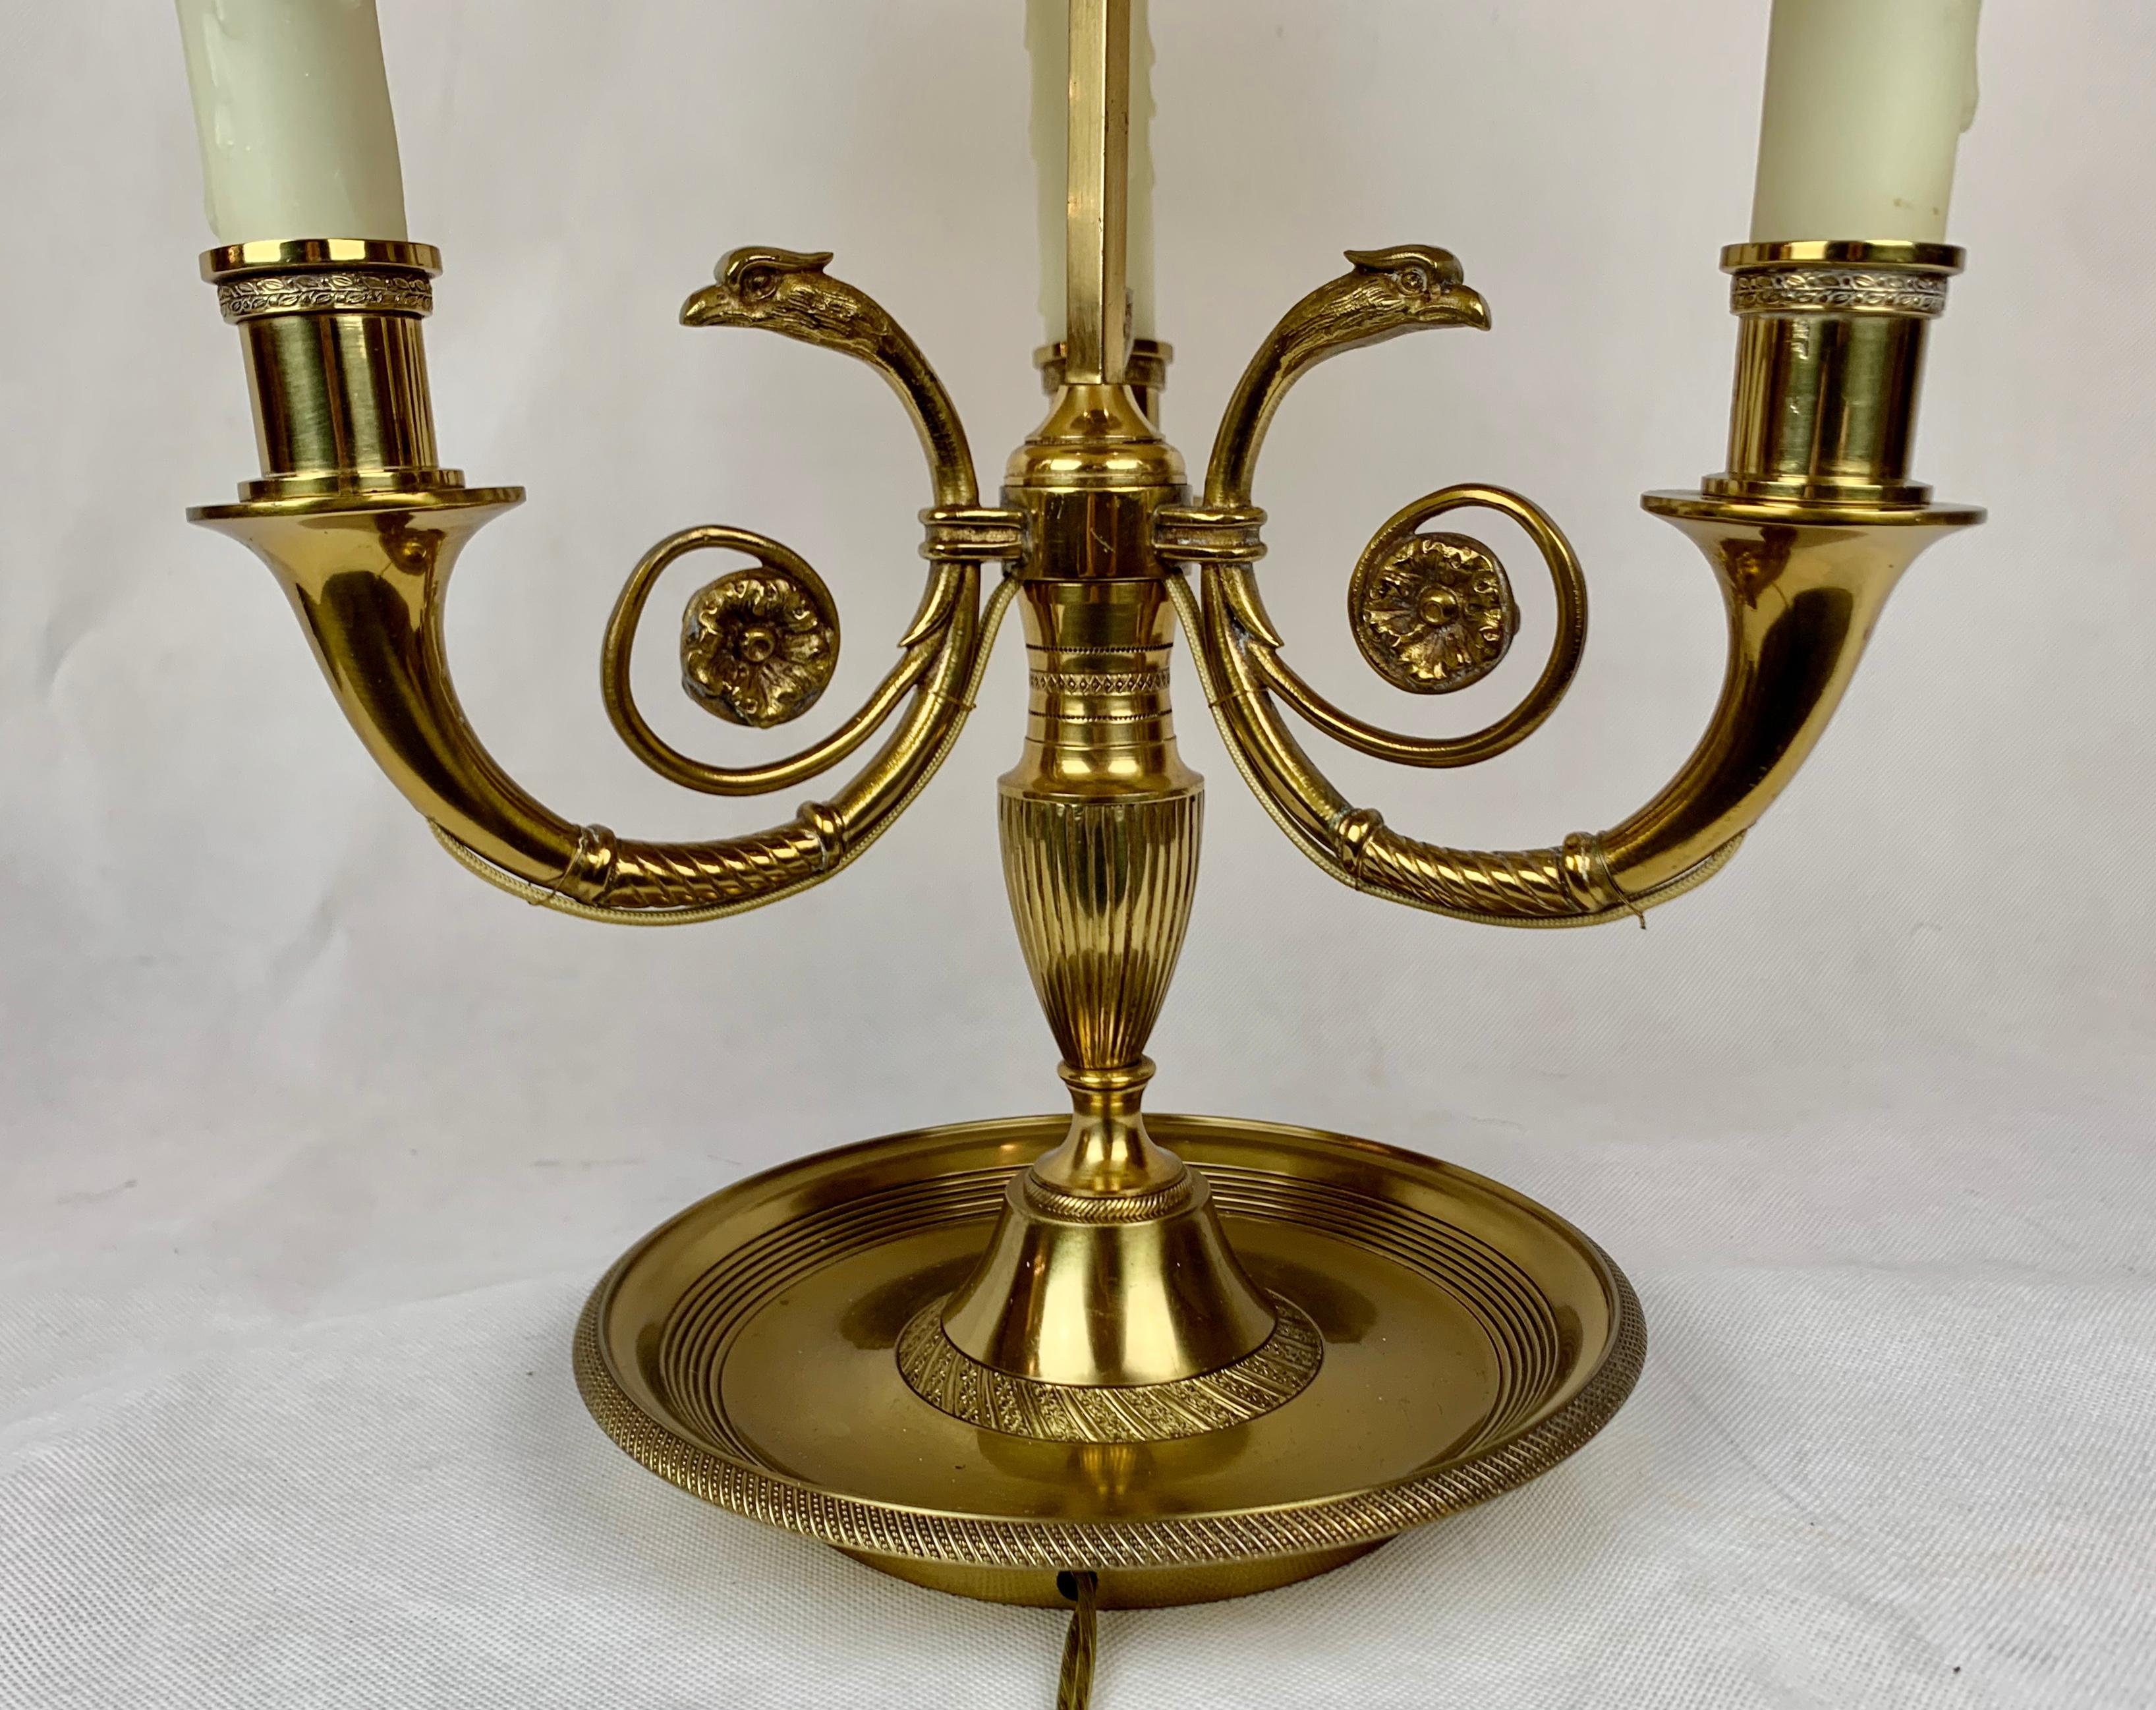 Three-light bronze bouillotte lamp with a black tôle shade in the French Empire style. The shade raises and lowers to adjust the light. Bouillotte is a card game and the lamp was placed in the center of a bouillotte table, as the candles burned low